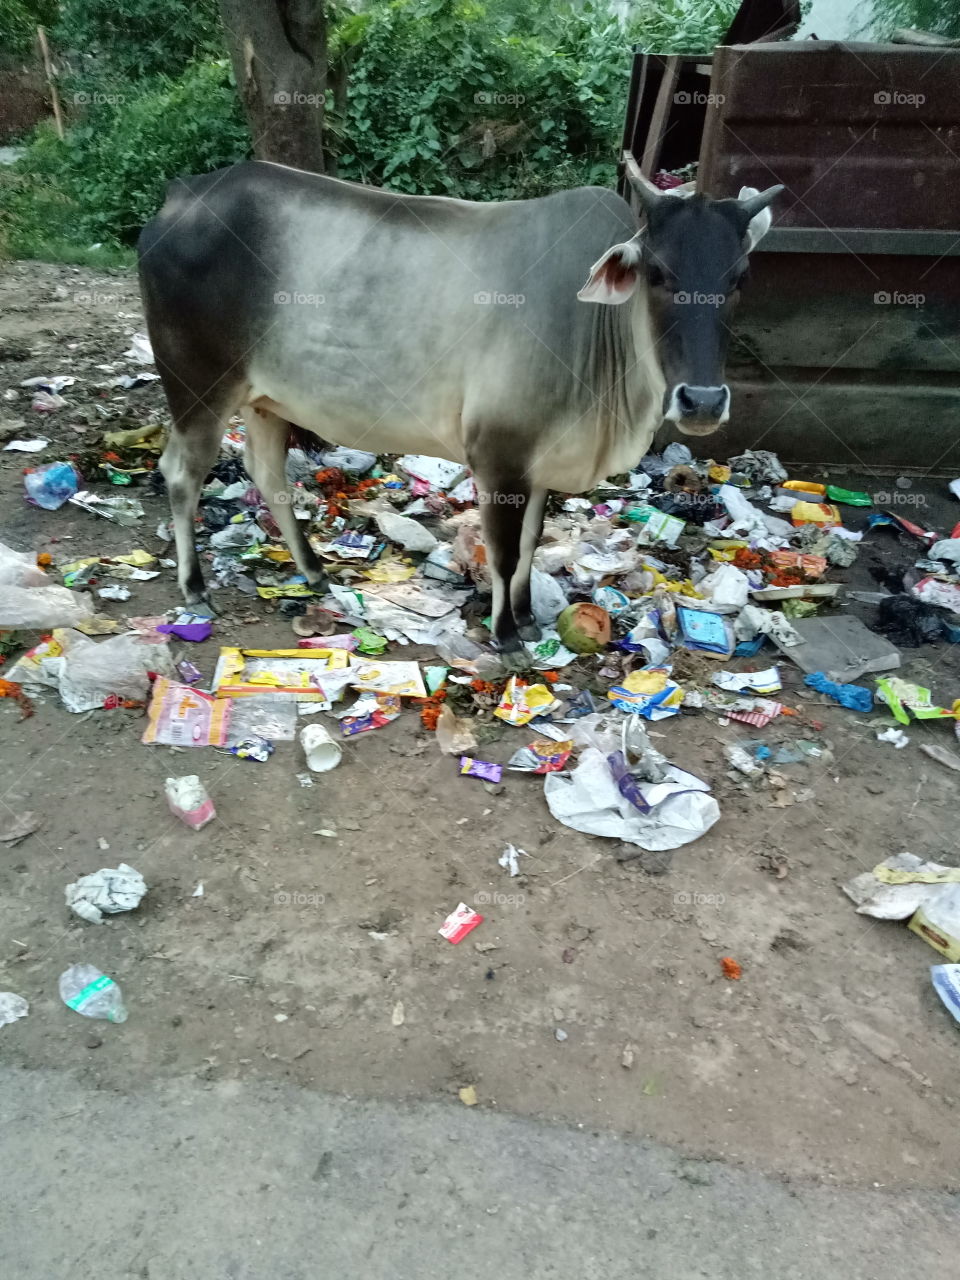 a cow is standing on a polluted place